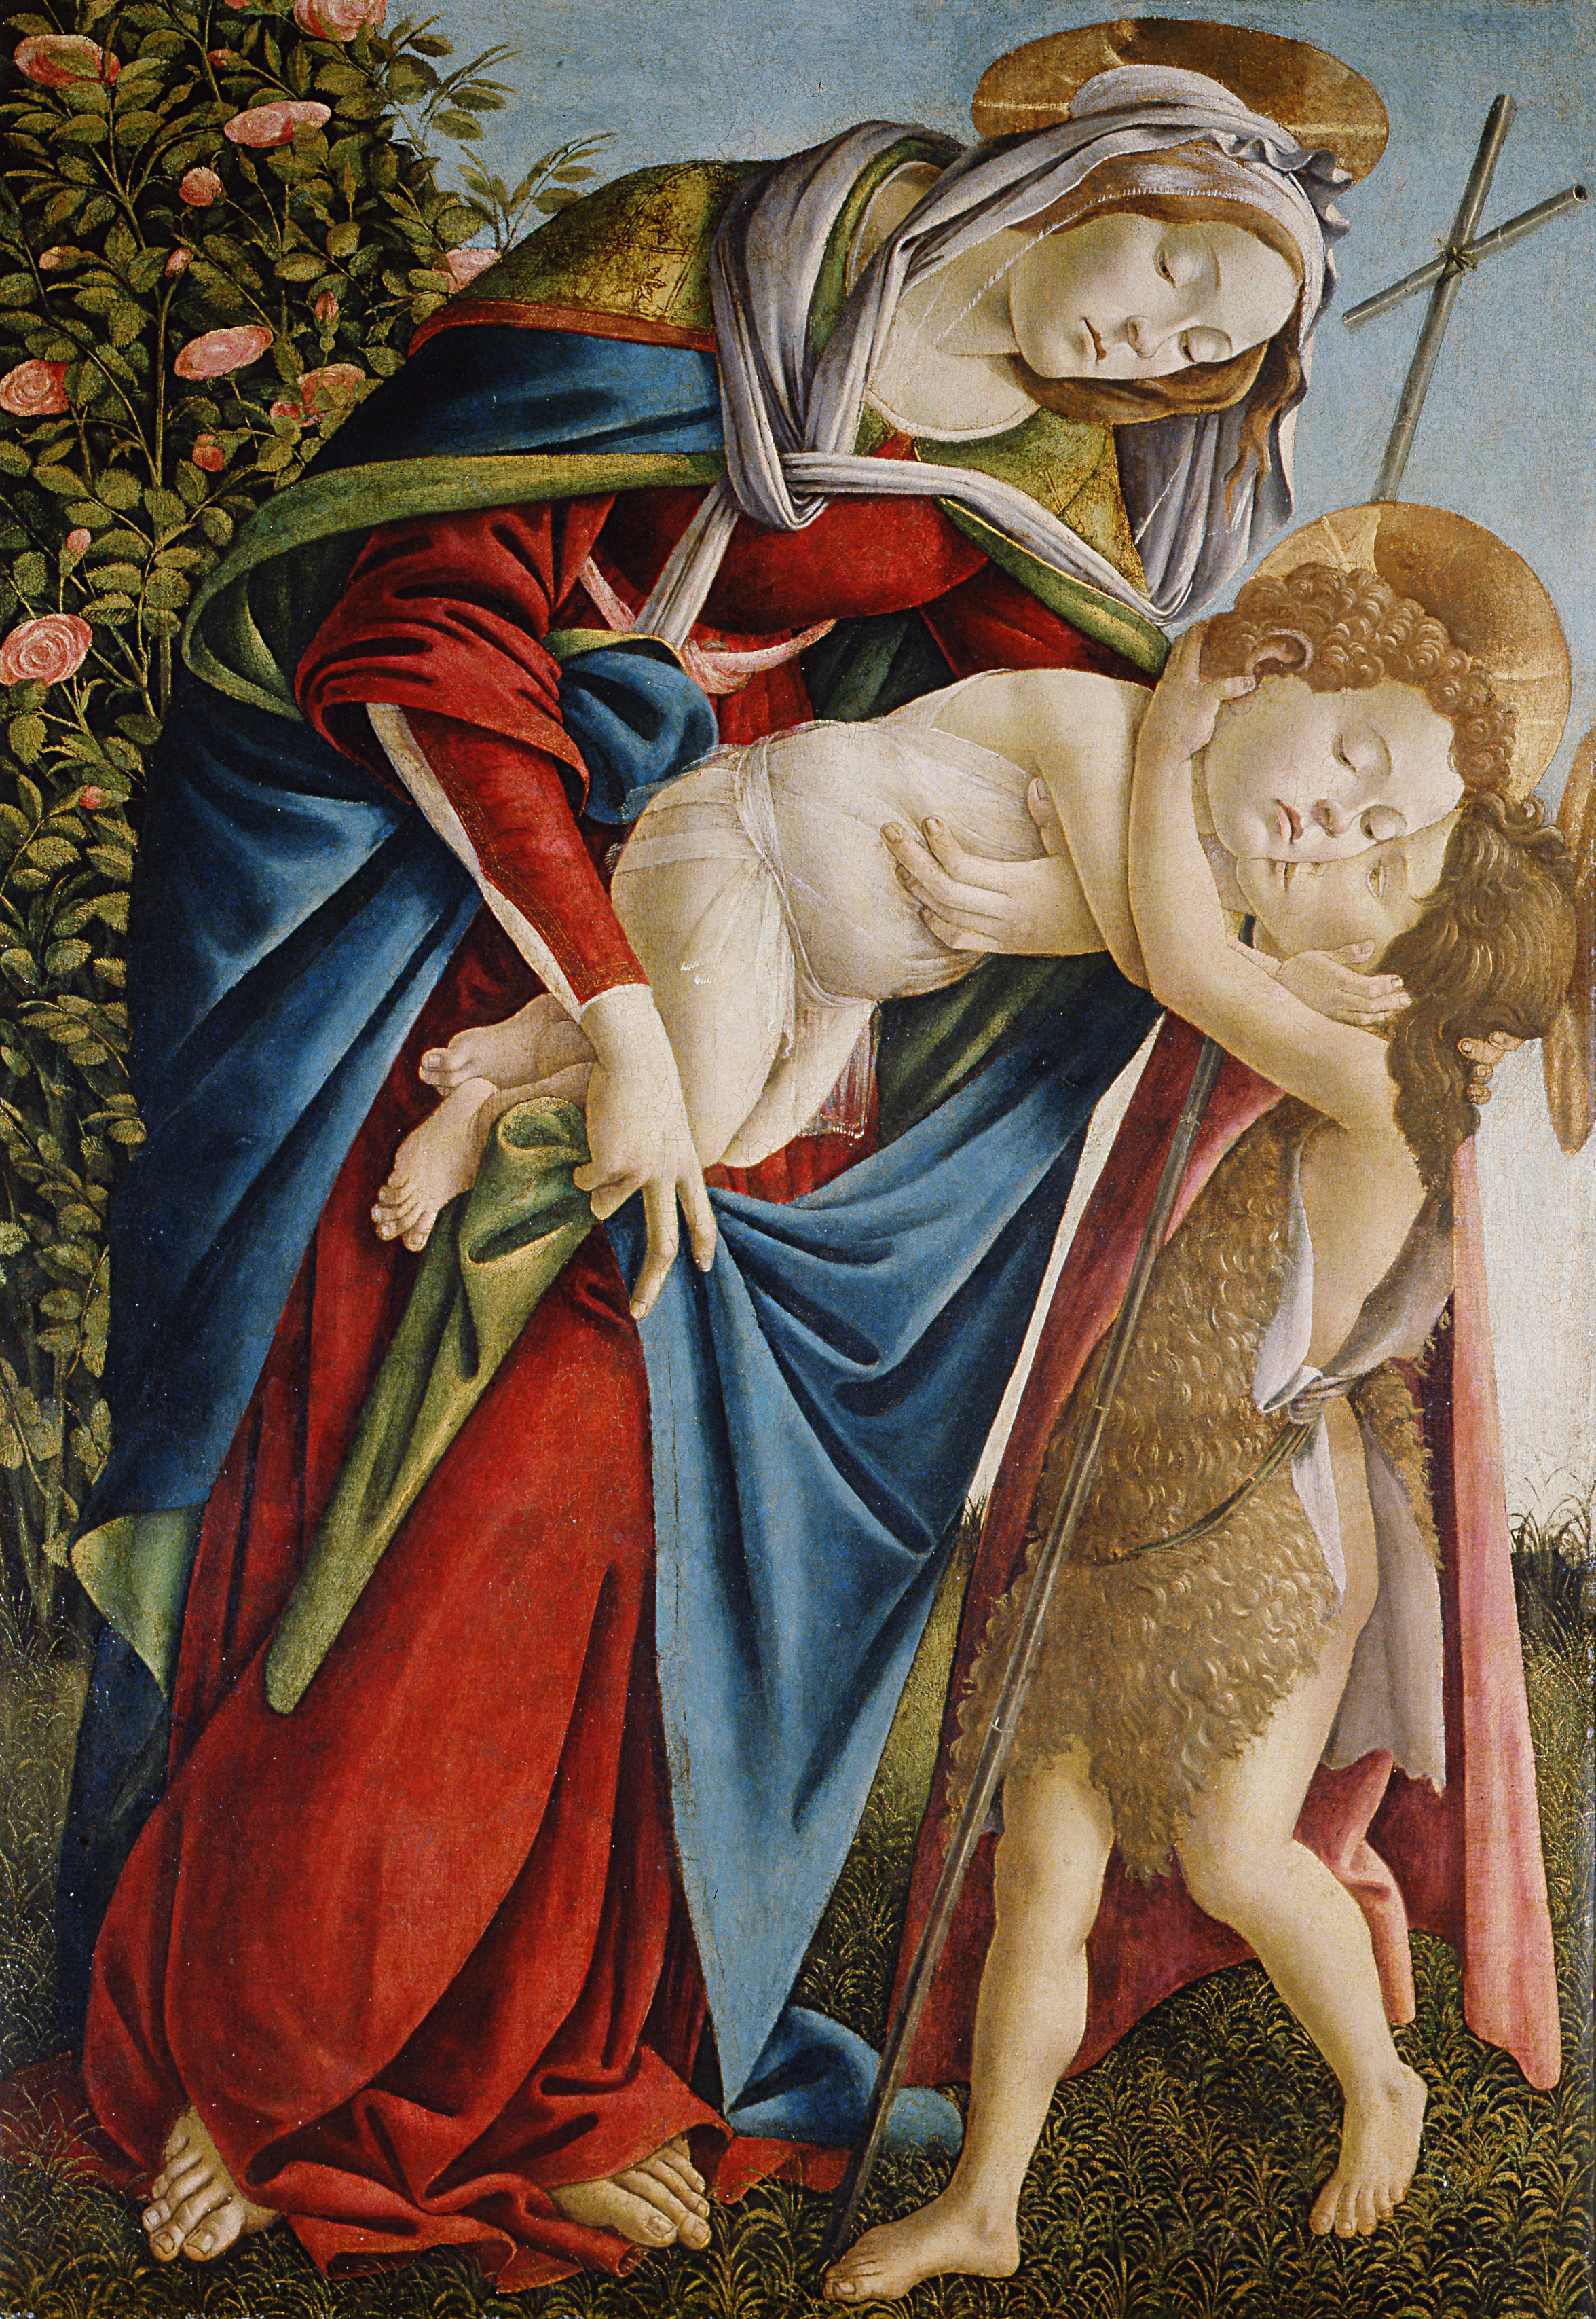 Alessandro Filipepi, known as Sandro Botticelli (Florence, 1445 – 1510)<br> Madonna and Child with St John